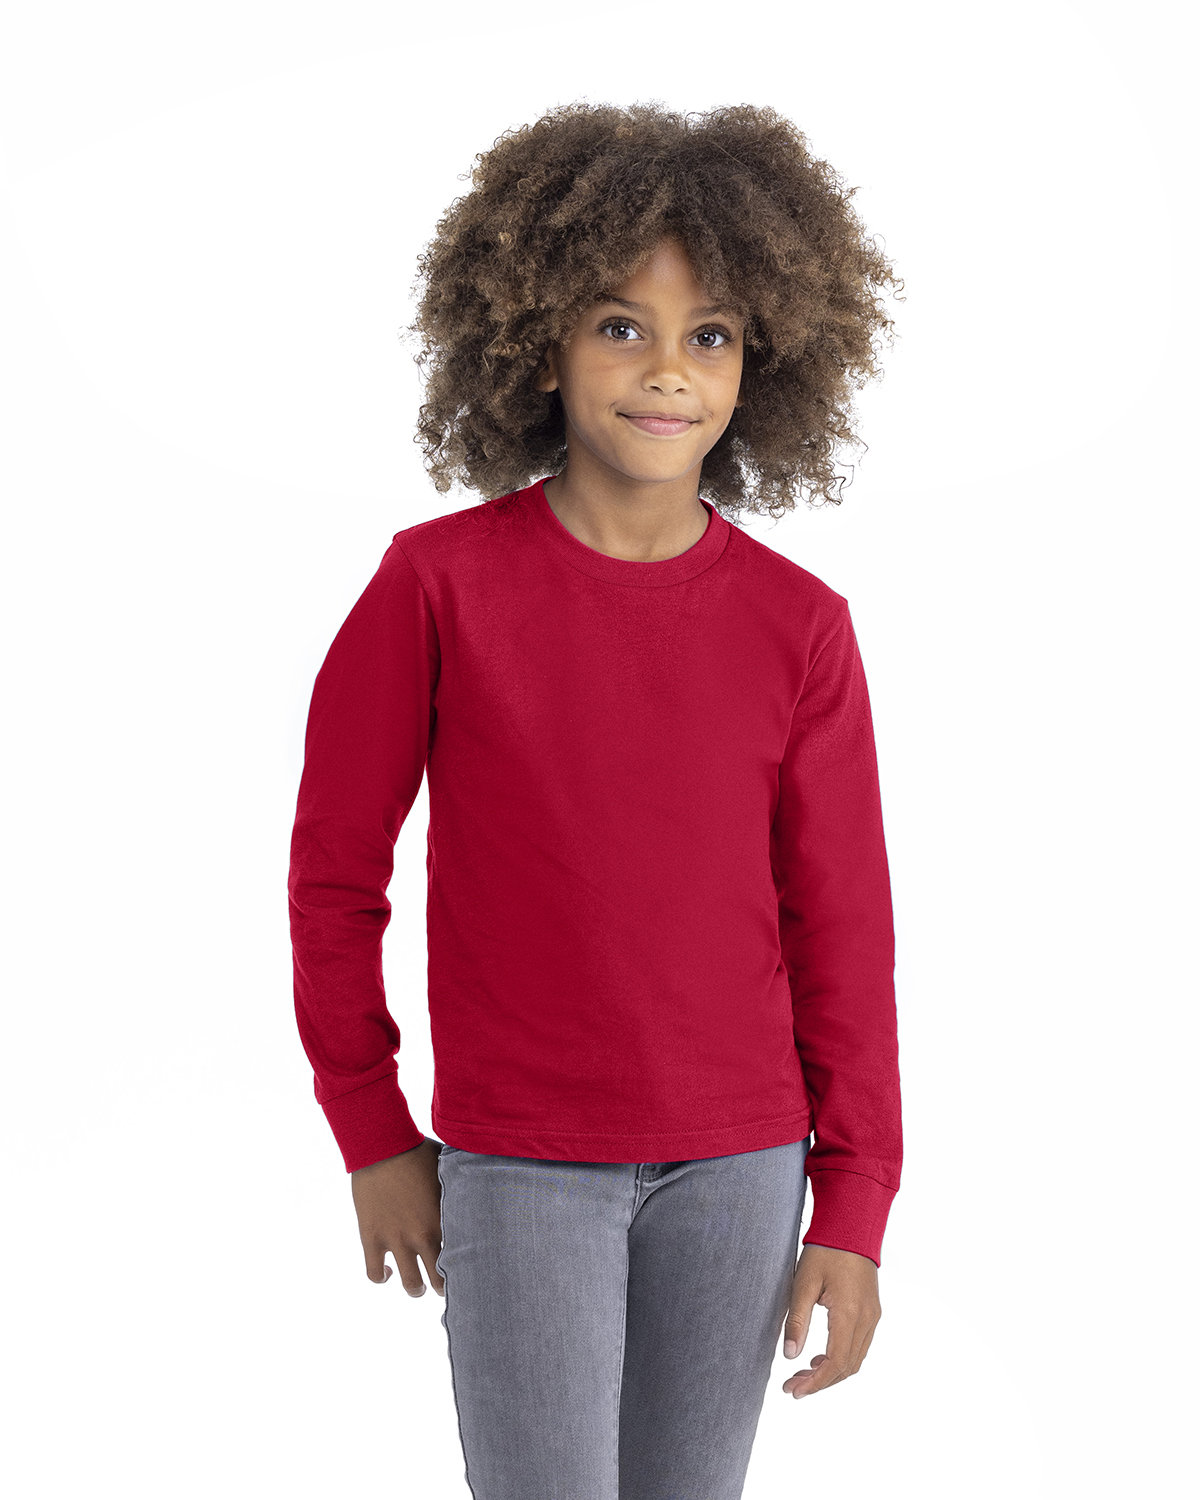 Next Level Apparel 3311 - Youth Cotton Long Sleeve T-Shirt